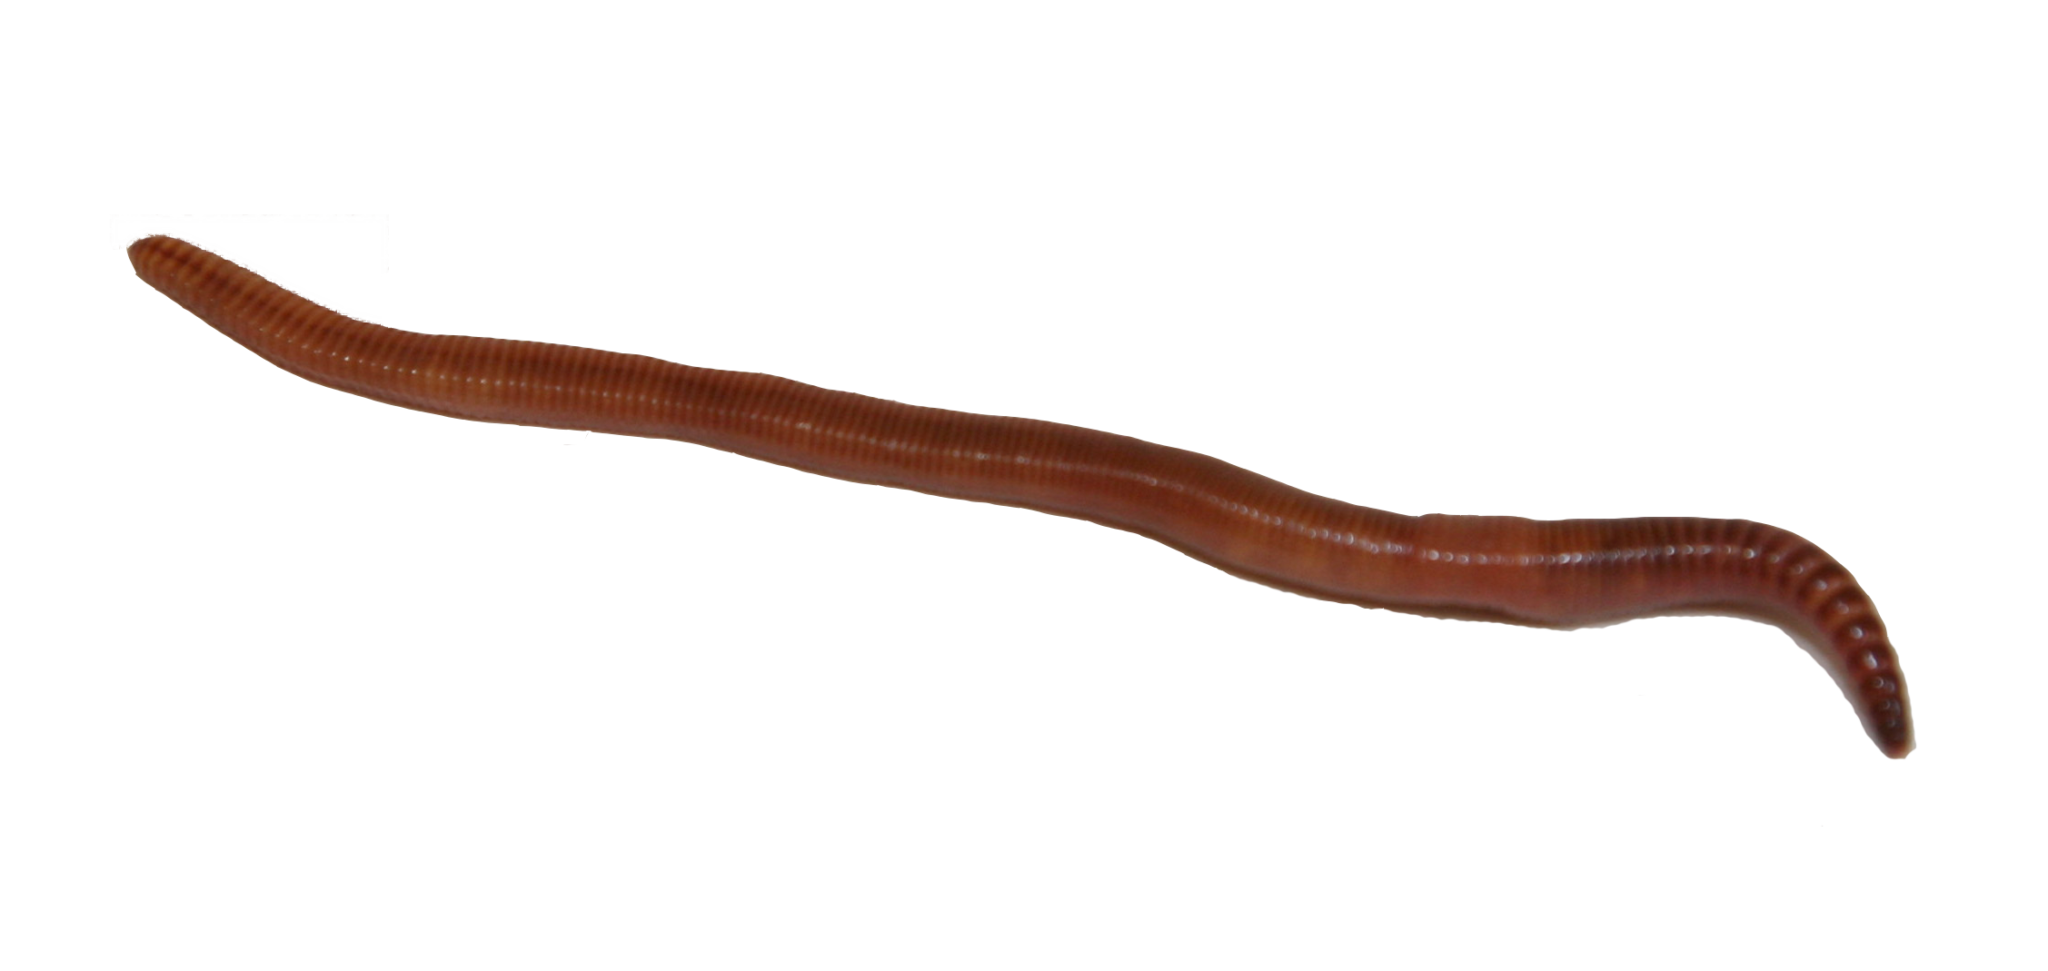 download red worms for sale near me